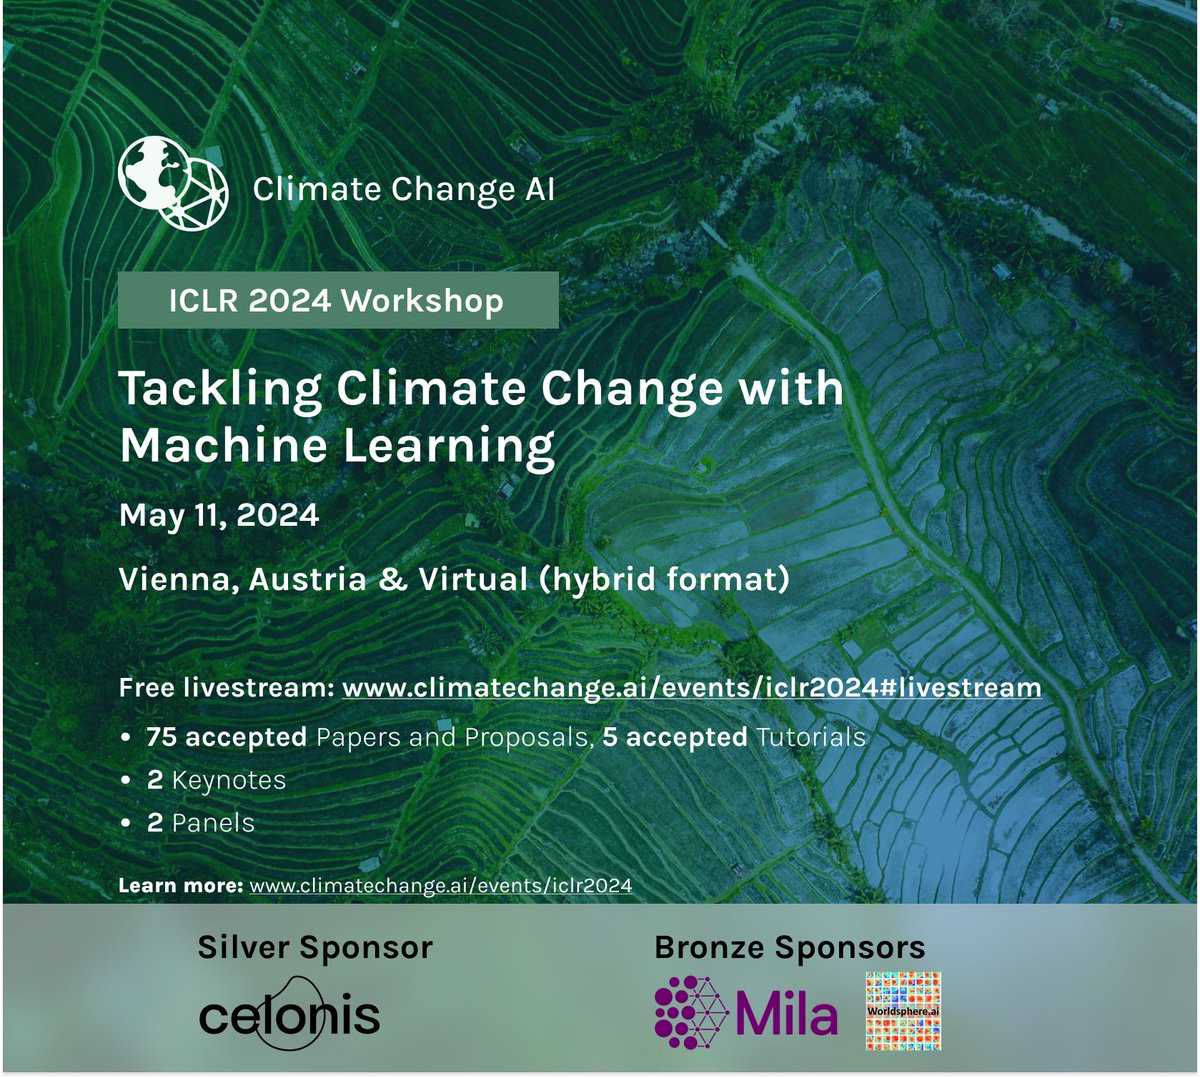 We are excited to kick off our #ICLR2024 workshop in just about 15 minutes! 🎉 🤓 See you all in room Stolz 1 - and if you cannot make it in person, check out our free livestream: climatechange.ai/events/iclr202…